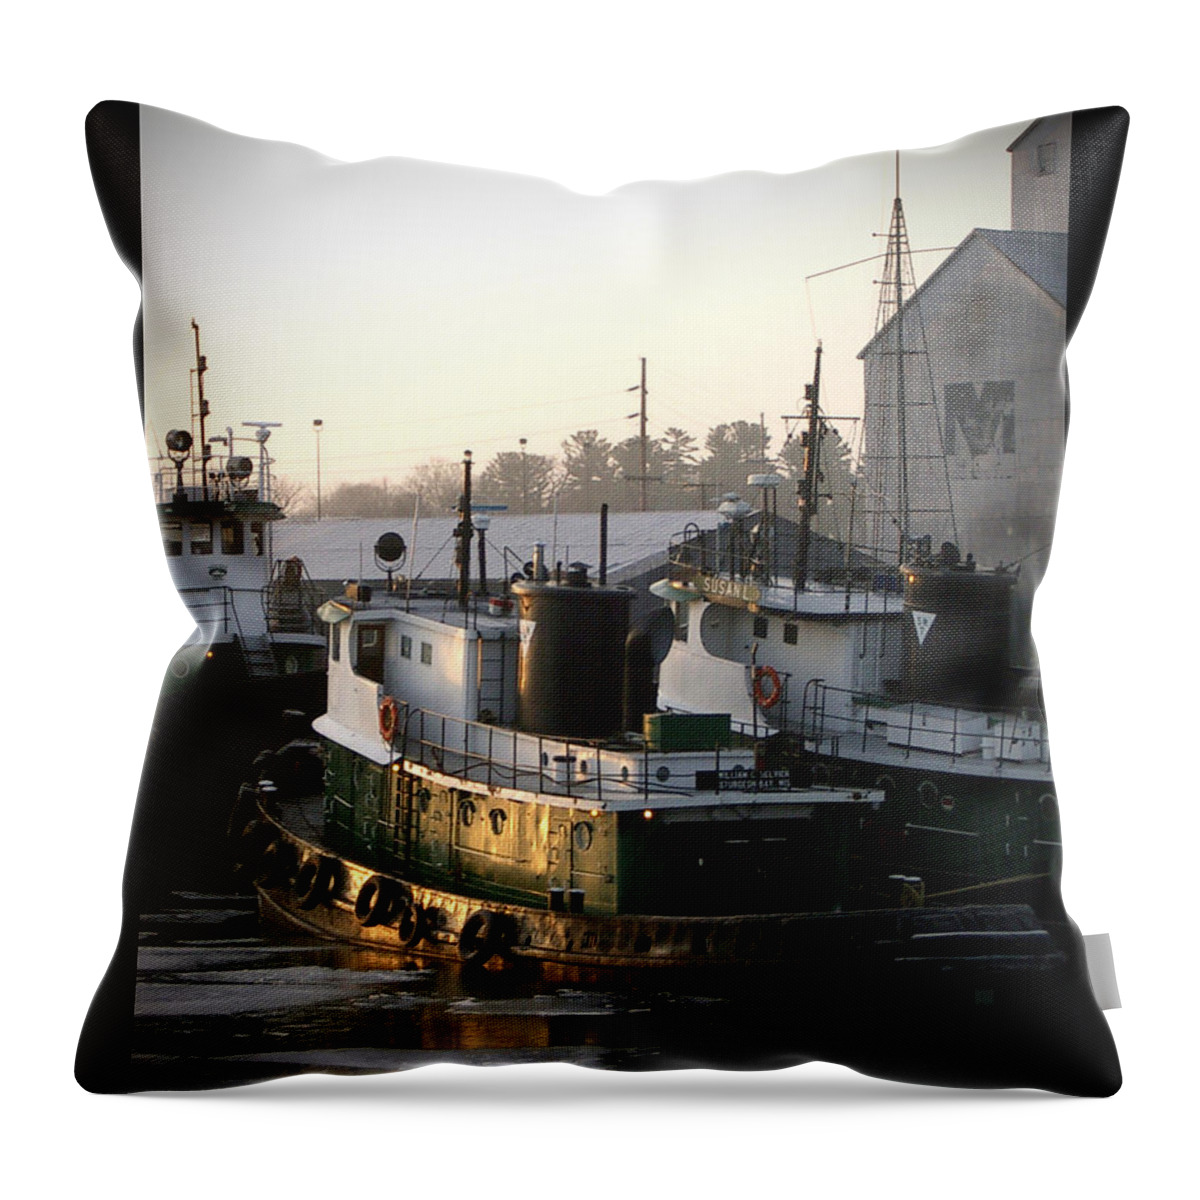 Tugs Throw Pillow featuring the photograph Winter Tugs by Tim Nyberg